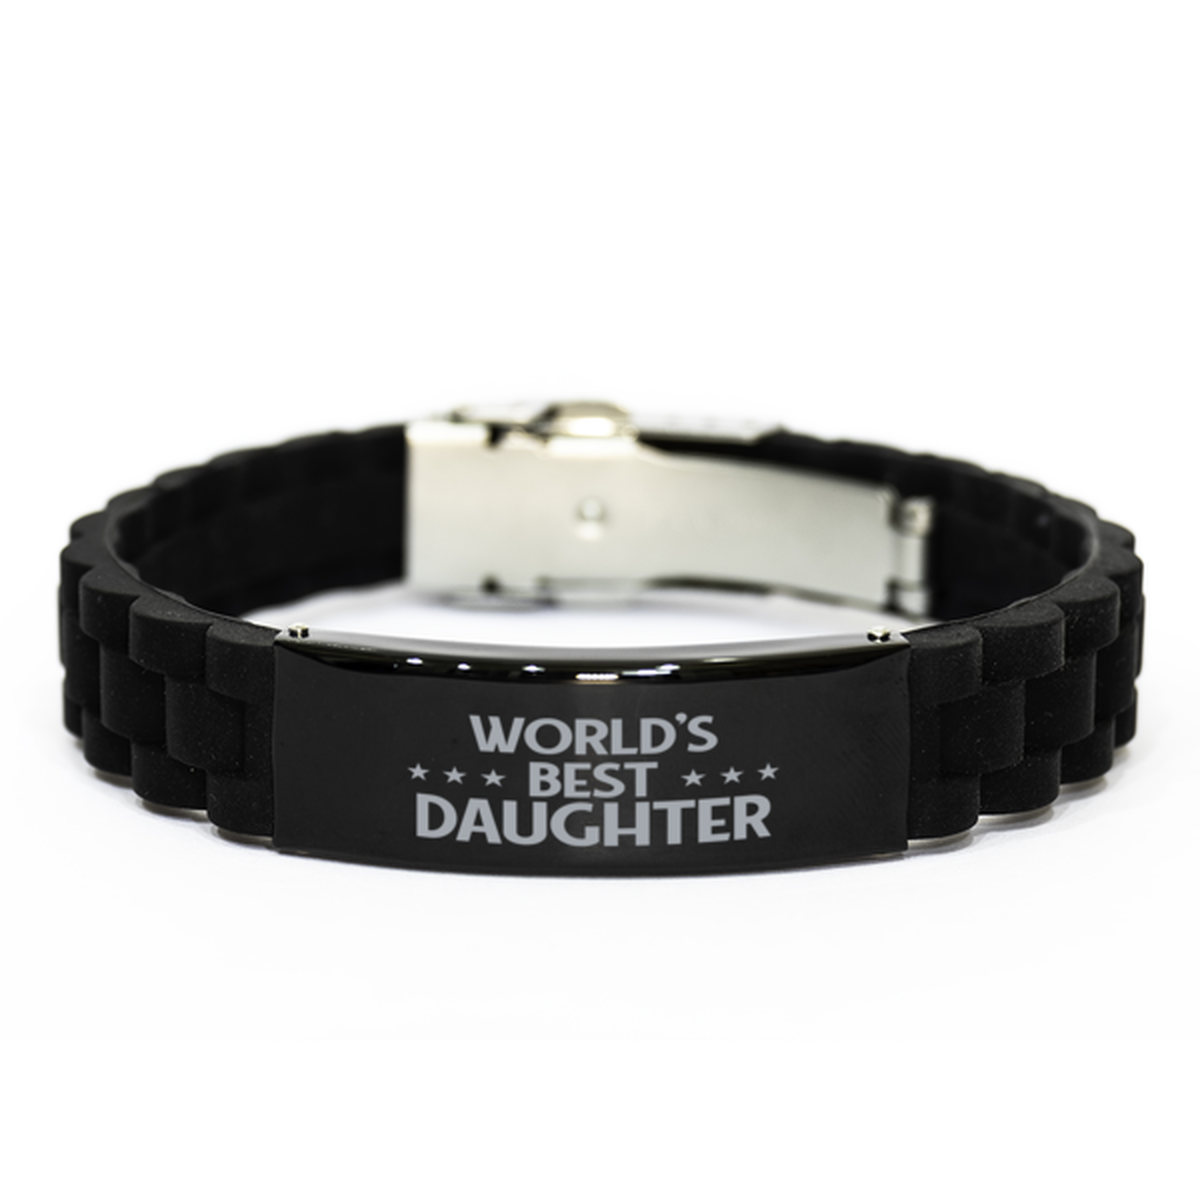 World's Best Daughter Gifts, Funny Black Engraved Bracelet For Daughter, Family Gifts For Women